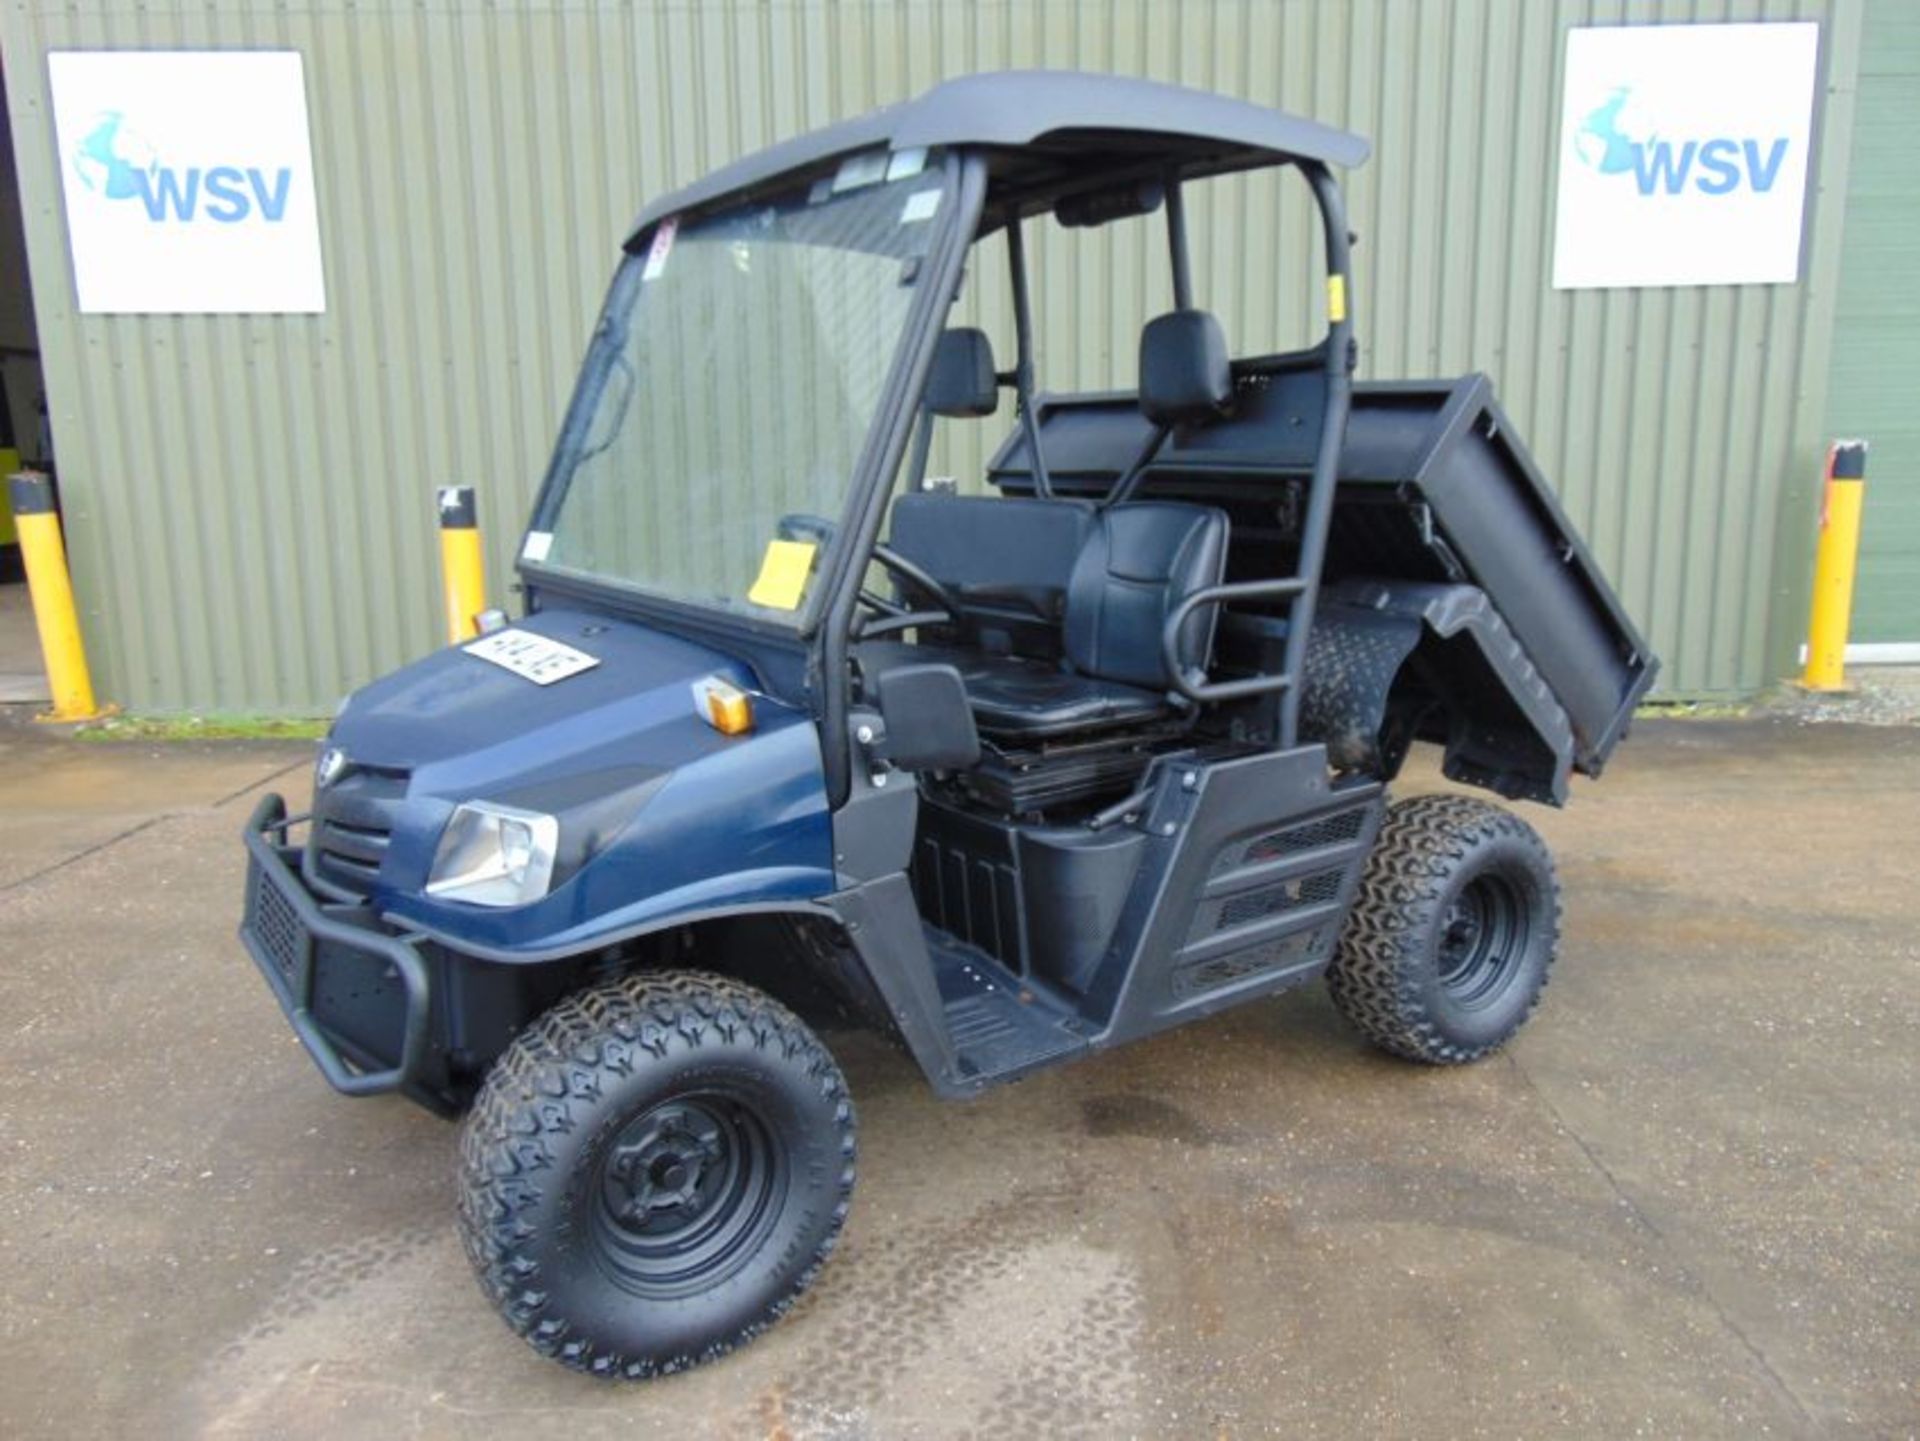 2014 Cushman XD1600 4x4 Diesel Utility Vehicle Showing 1104 hrs - Image 12 of 25